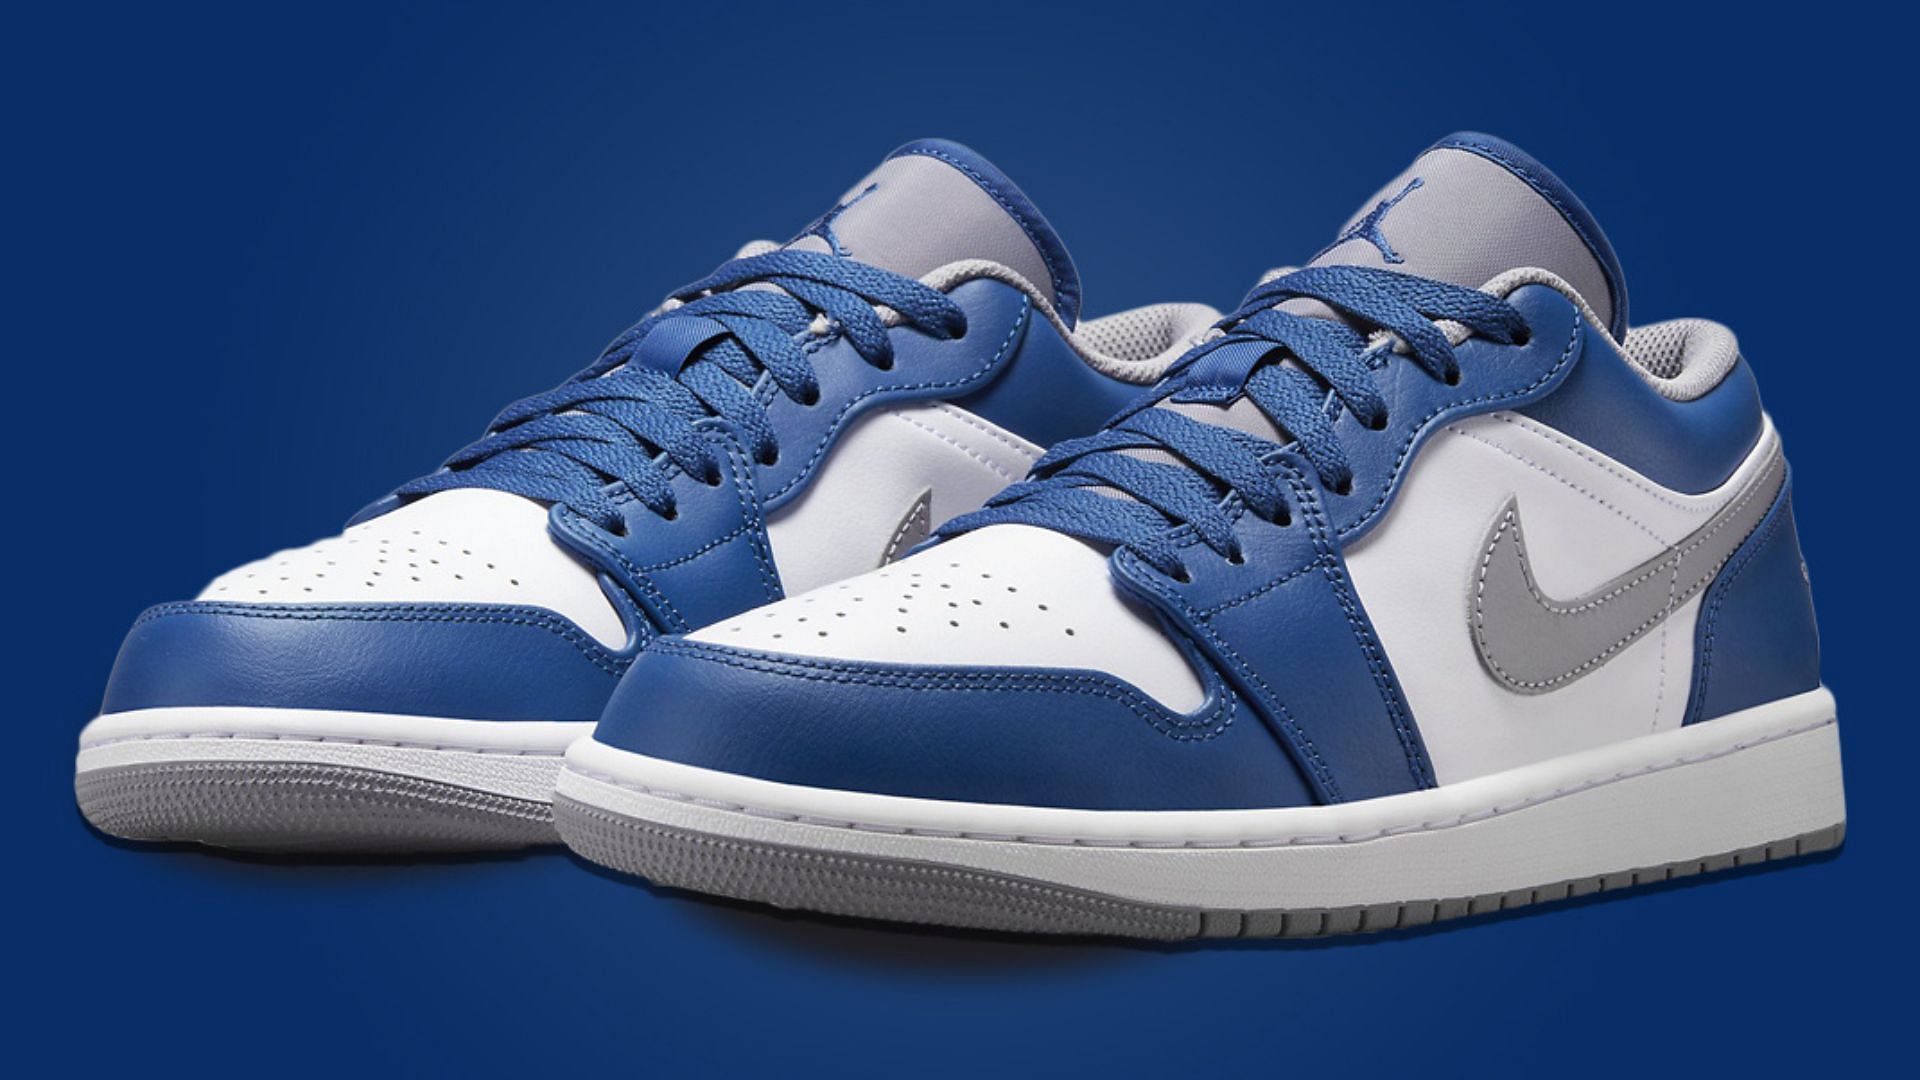 Where to buy Air Jordan 1 Low True Blue shoes? Price and more details ...